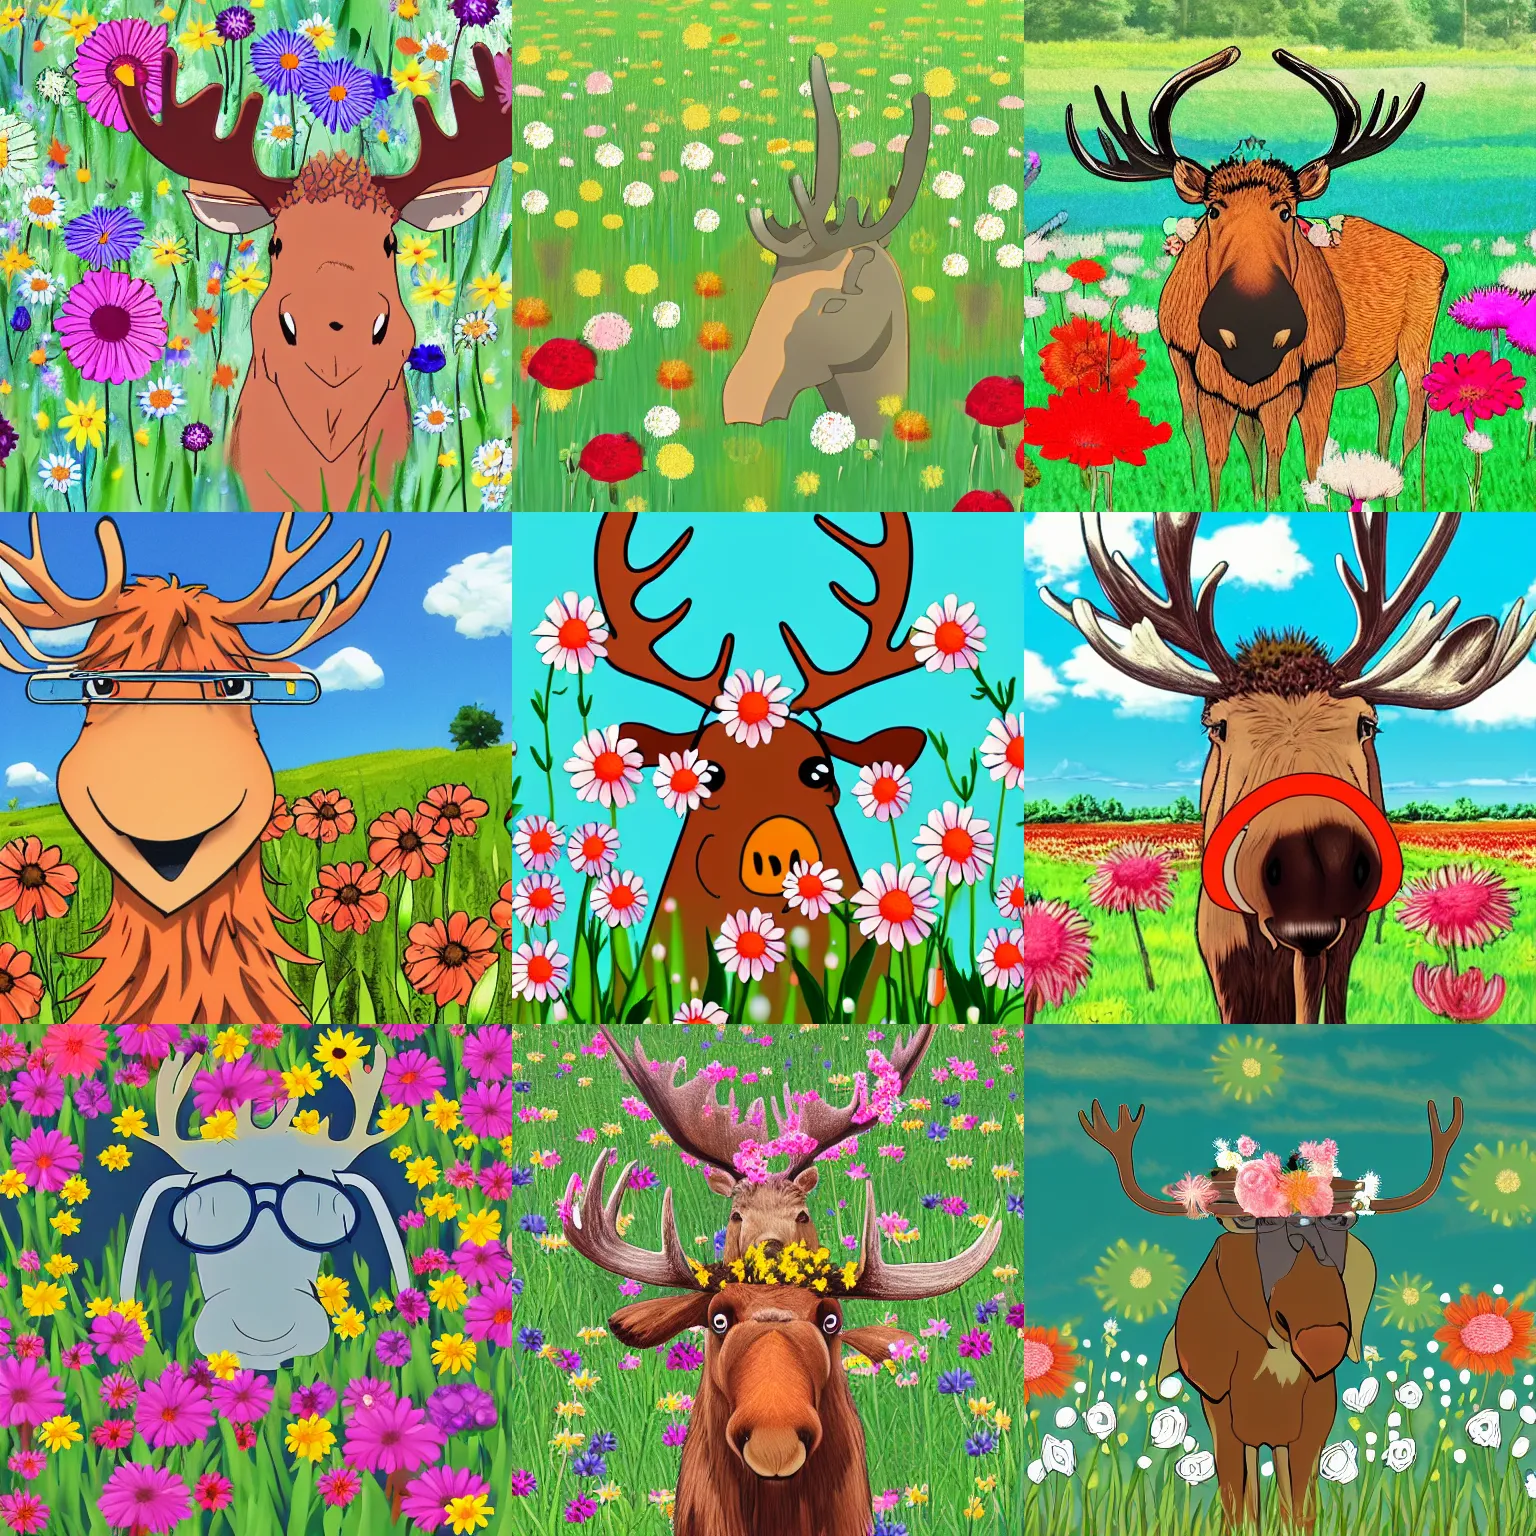 Prompt: a field of flowers with a happy moose wearing glasses in the style of an anime